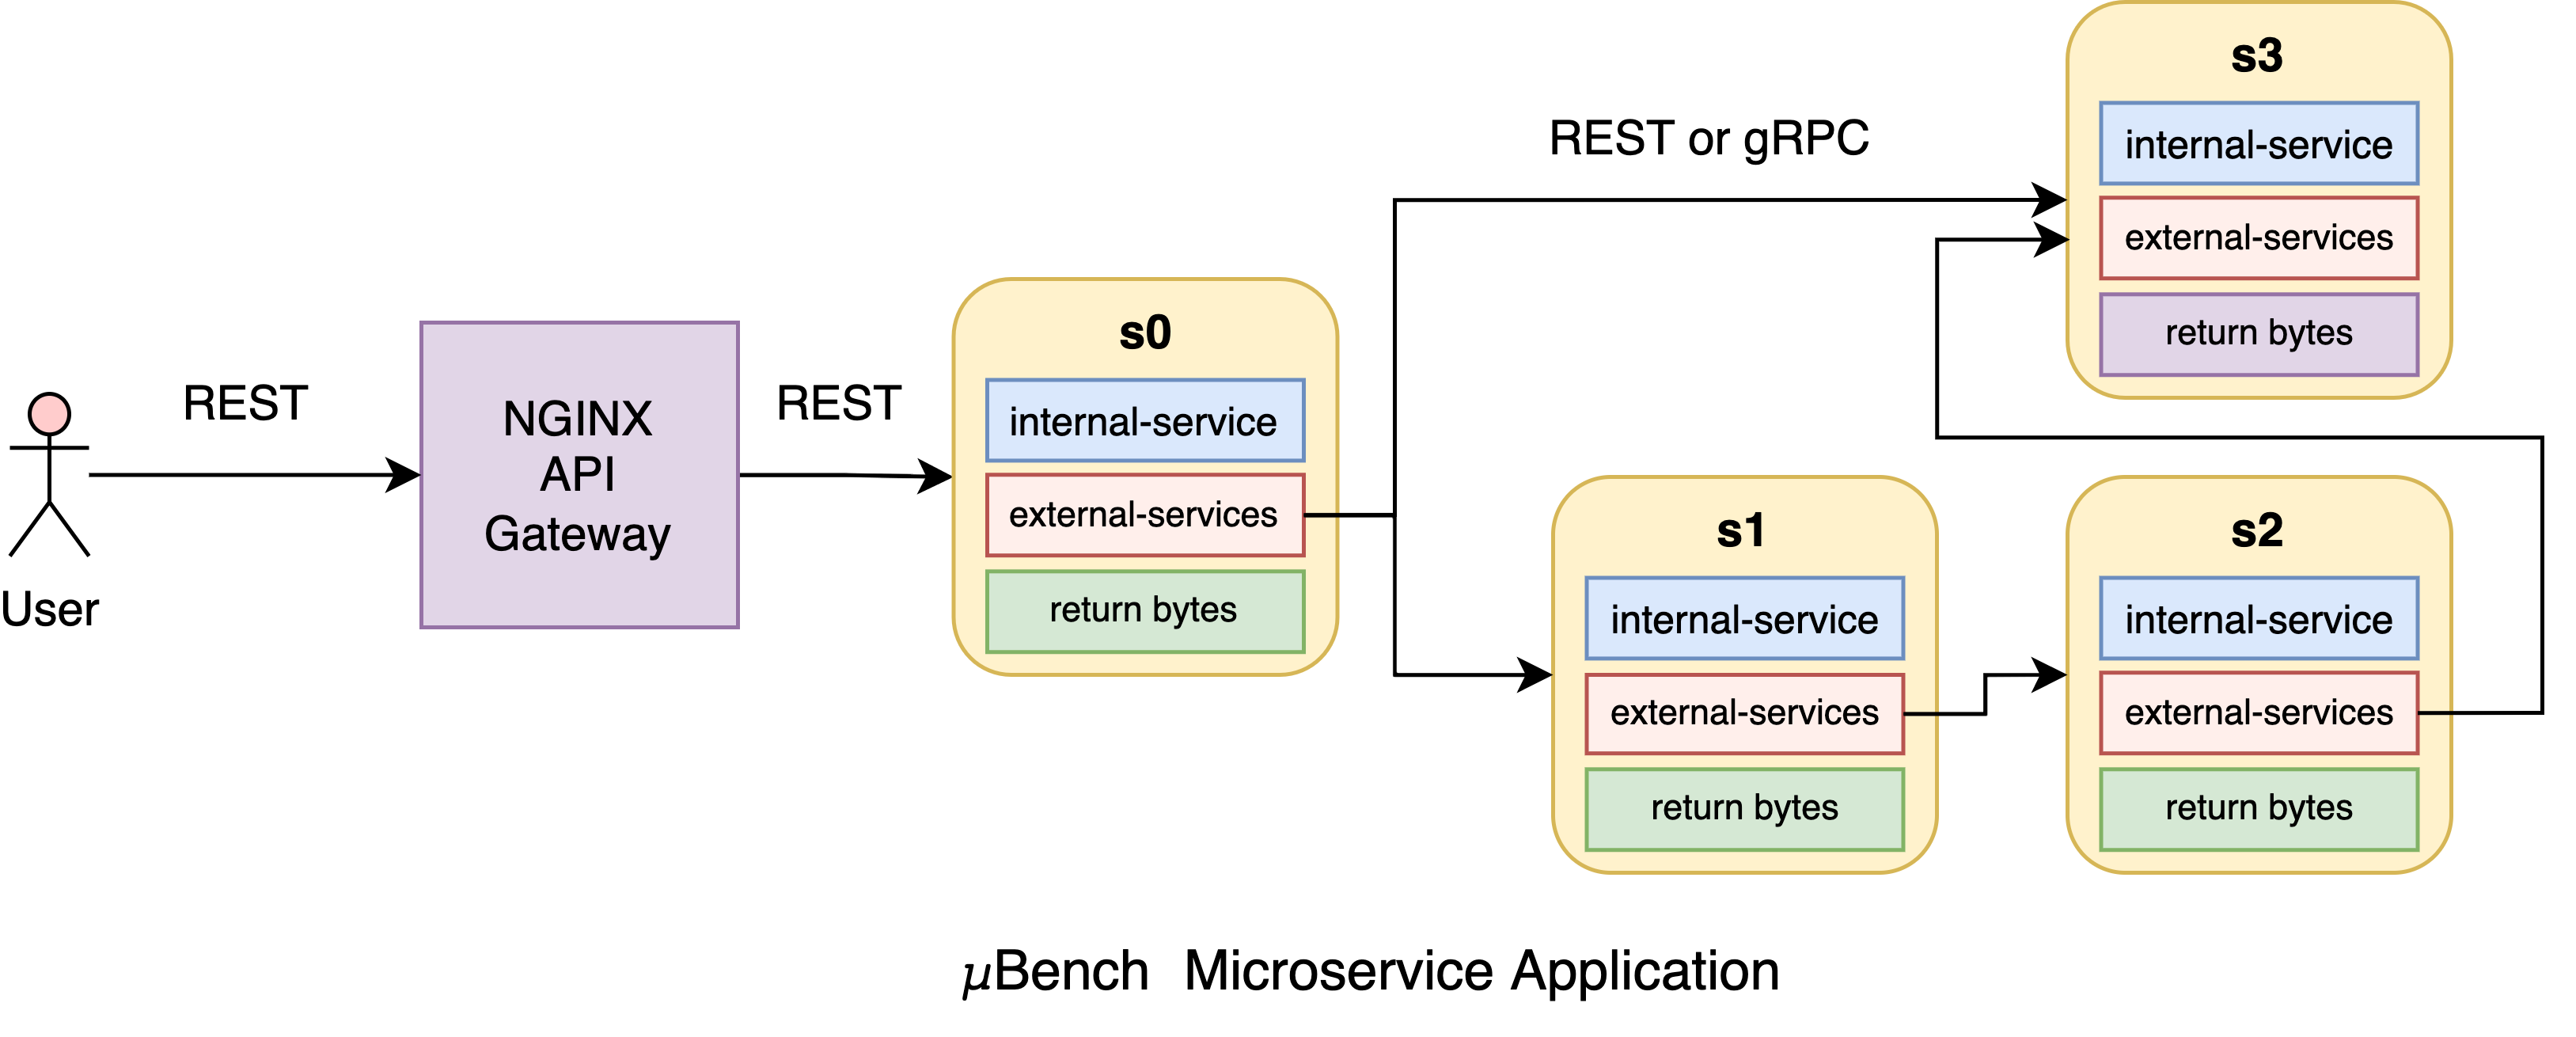 service-cell-rest-grpc